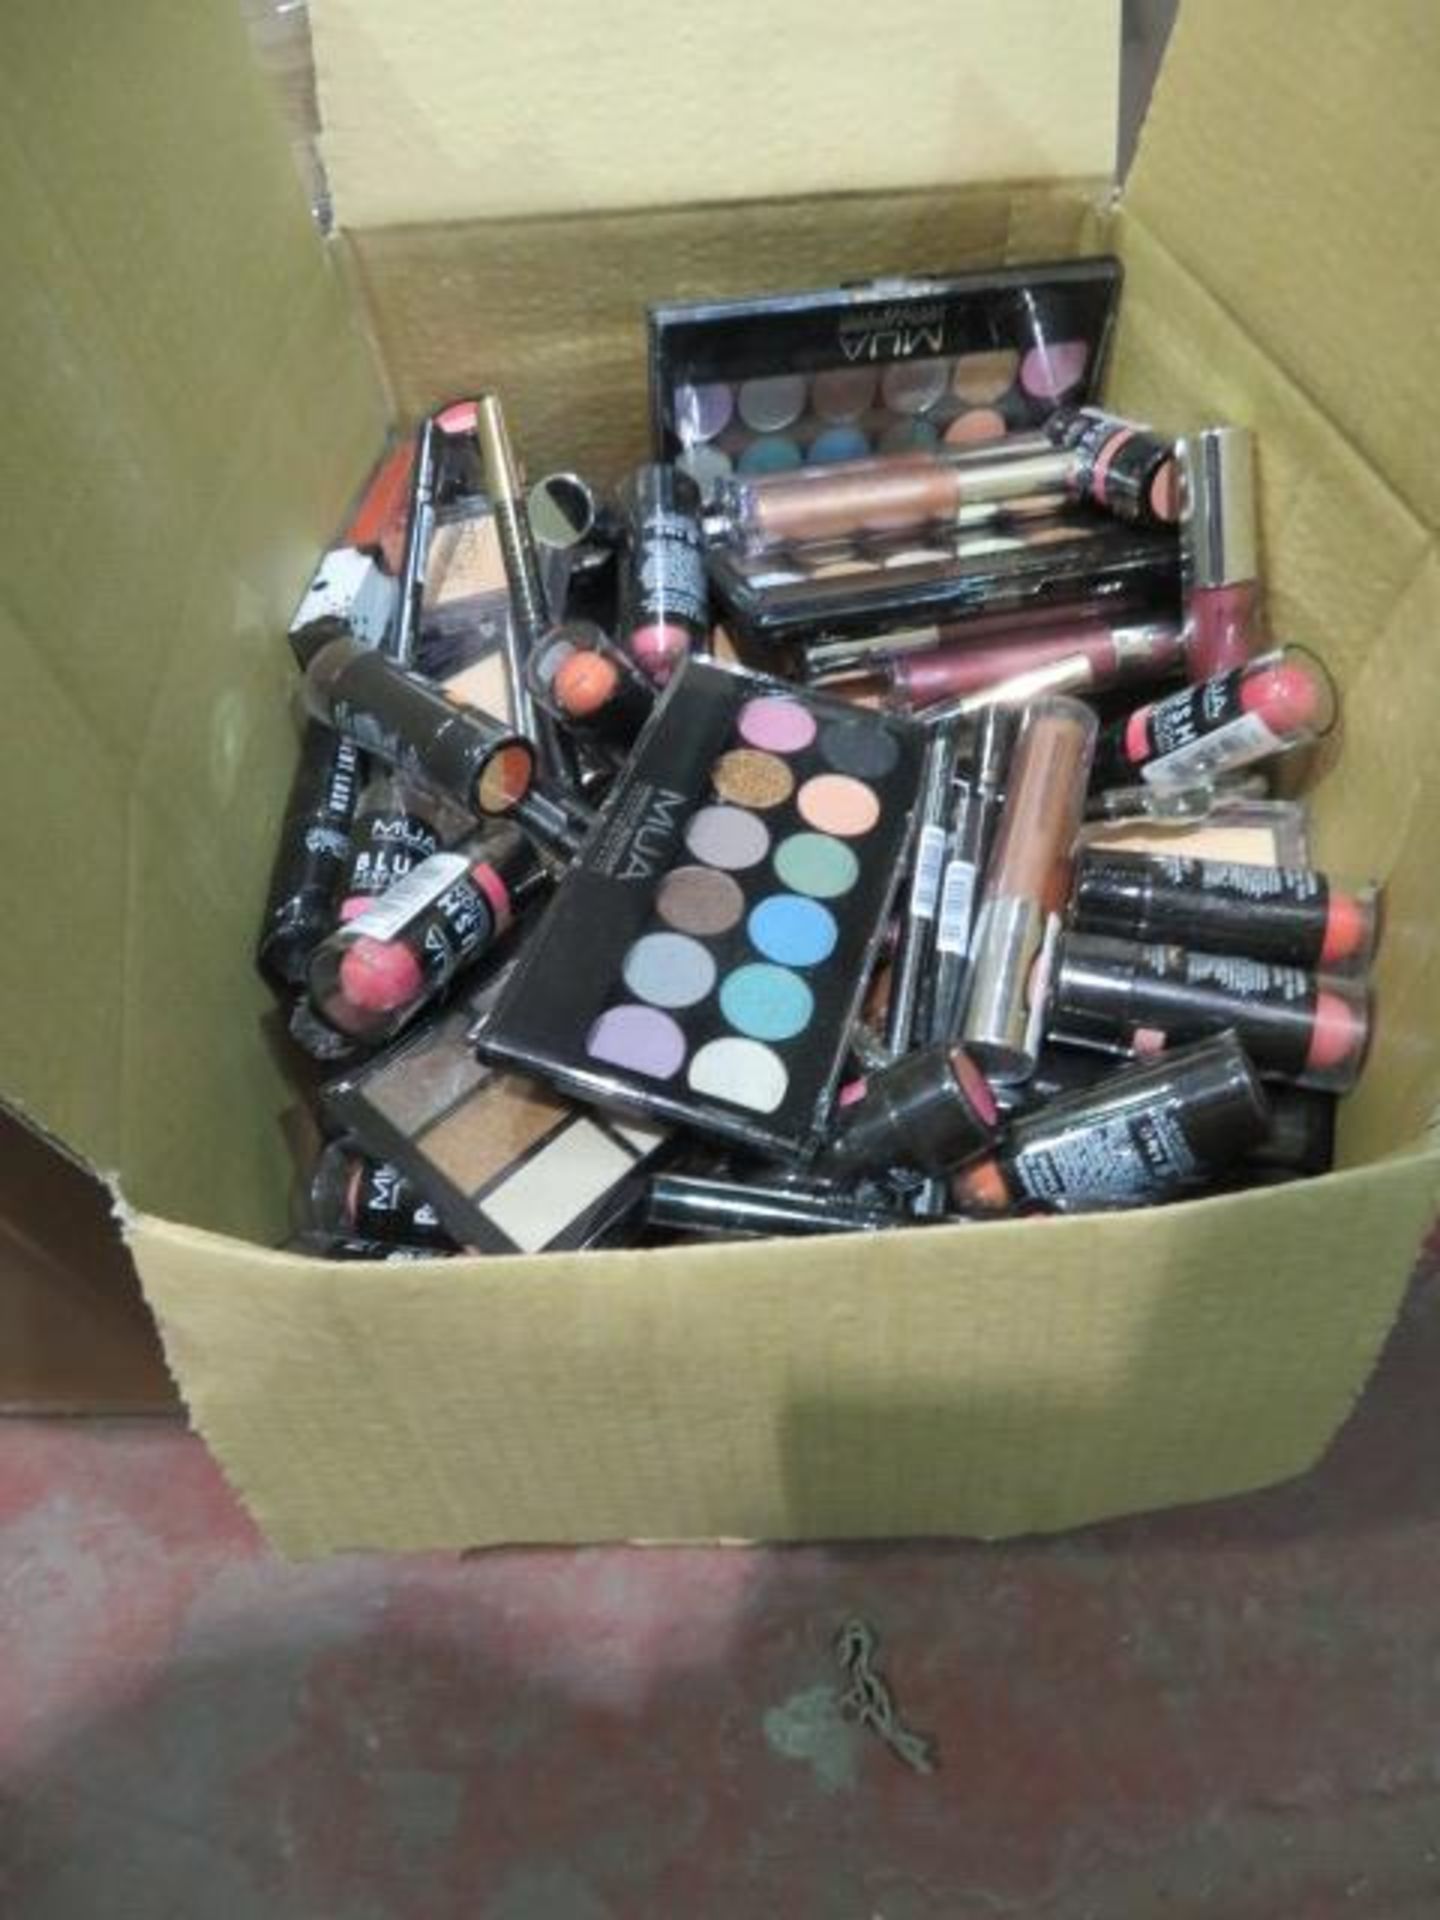 Circa. 200 items of various new make up acadamy make up to include: blush perfection, eyeshadow - Image 2 of 2